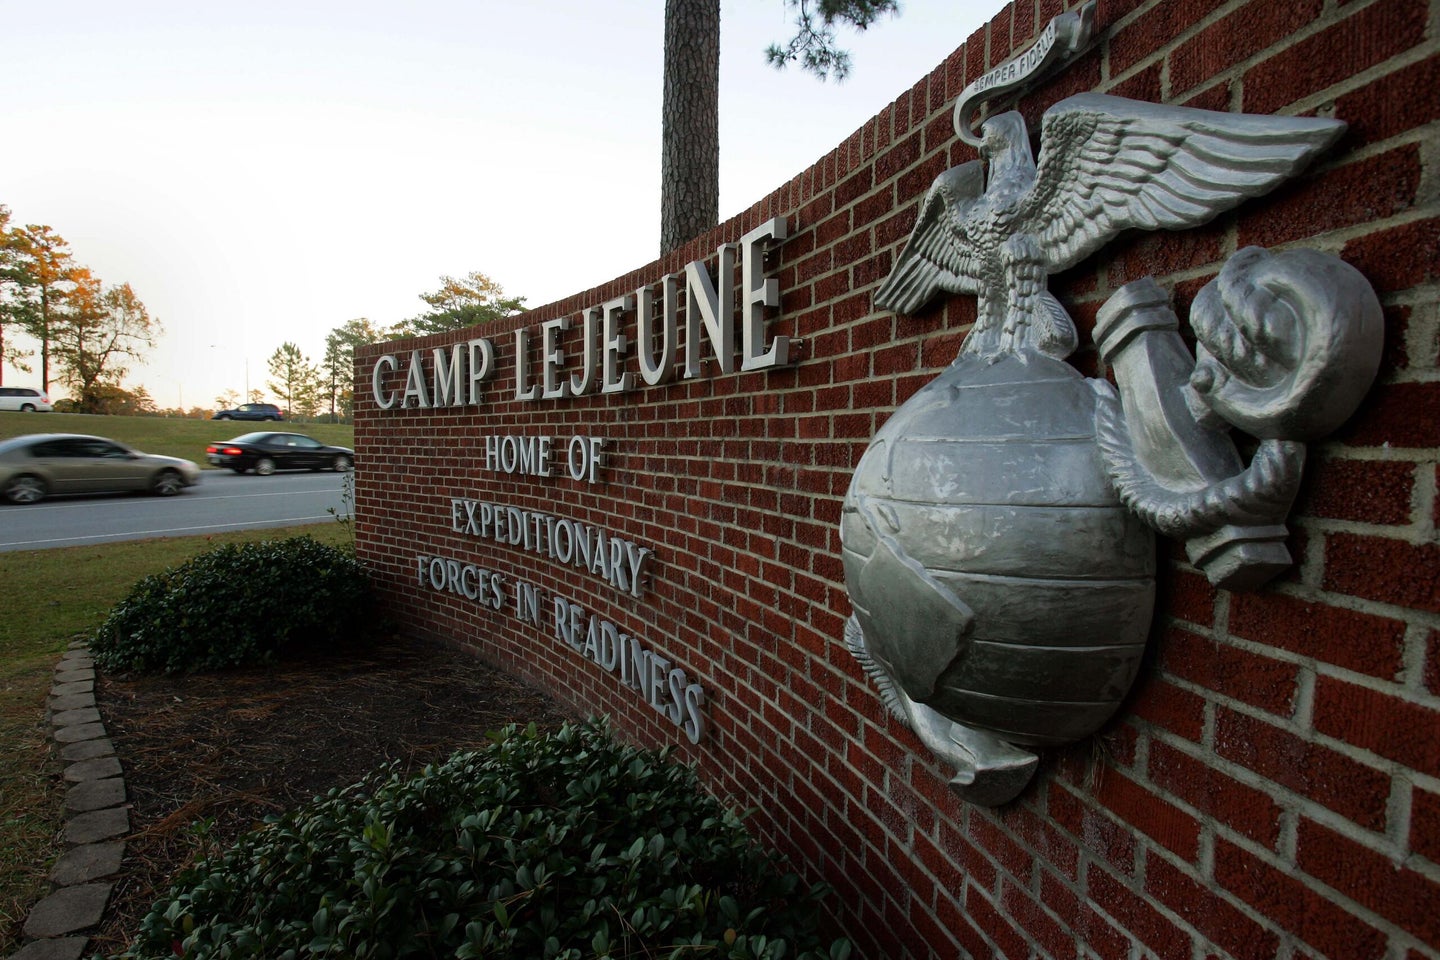 Cars enter the main gate at Camp Lejeune in Jacksonville, N.C. Friday, Dec. 2, 2005. (AP Photo/Gerry Broome)